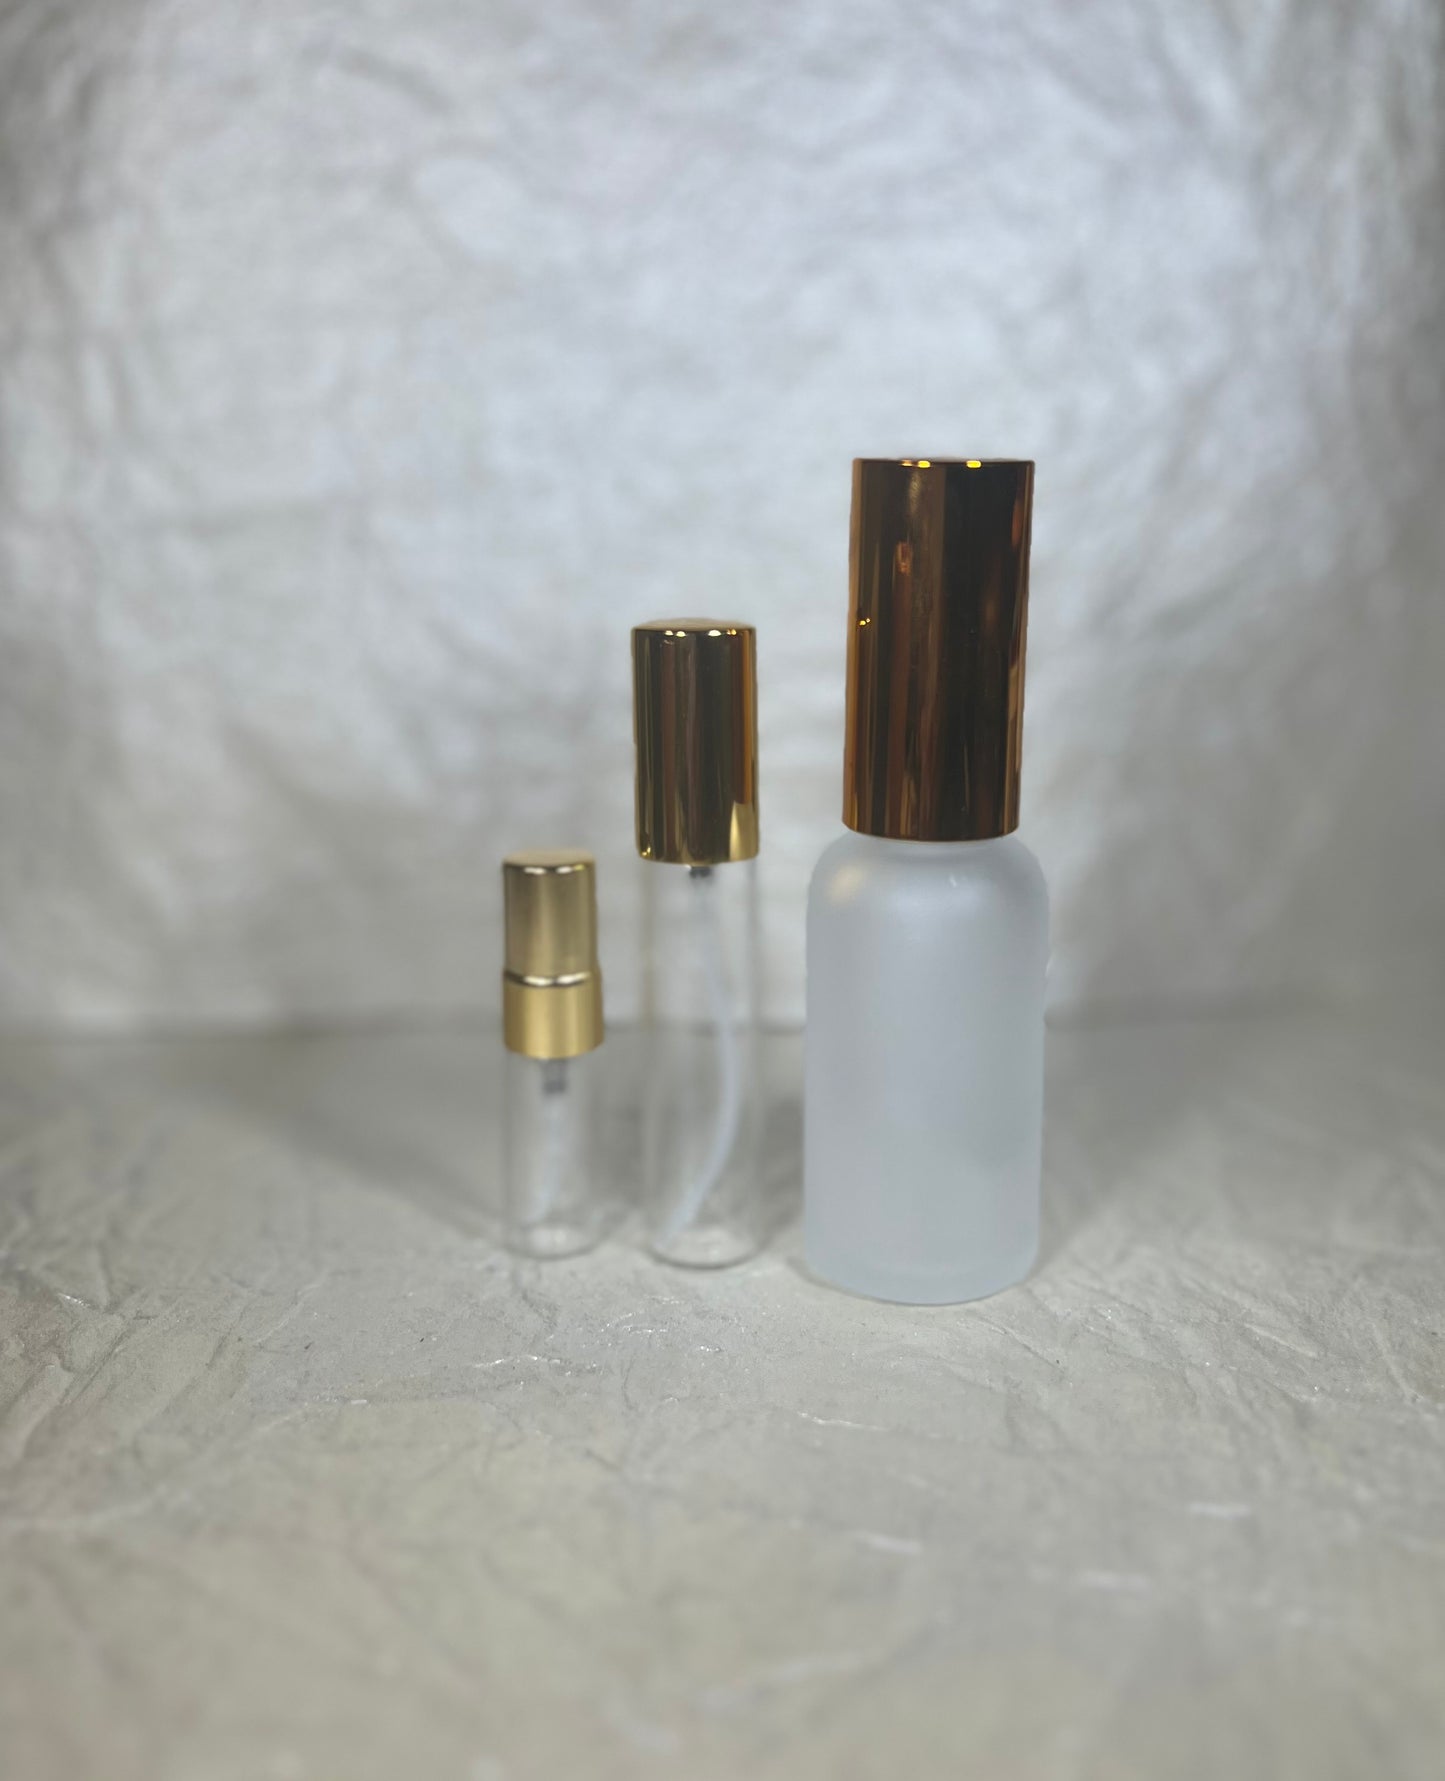 Elite Status (Inspired by Roja Elysium) - Premium Perfume Mist from Scented Trail Body Oils  - Just $5! Shop now at Scented Trail Body Oils 